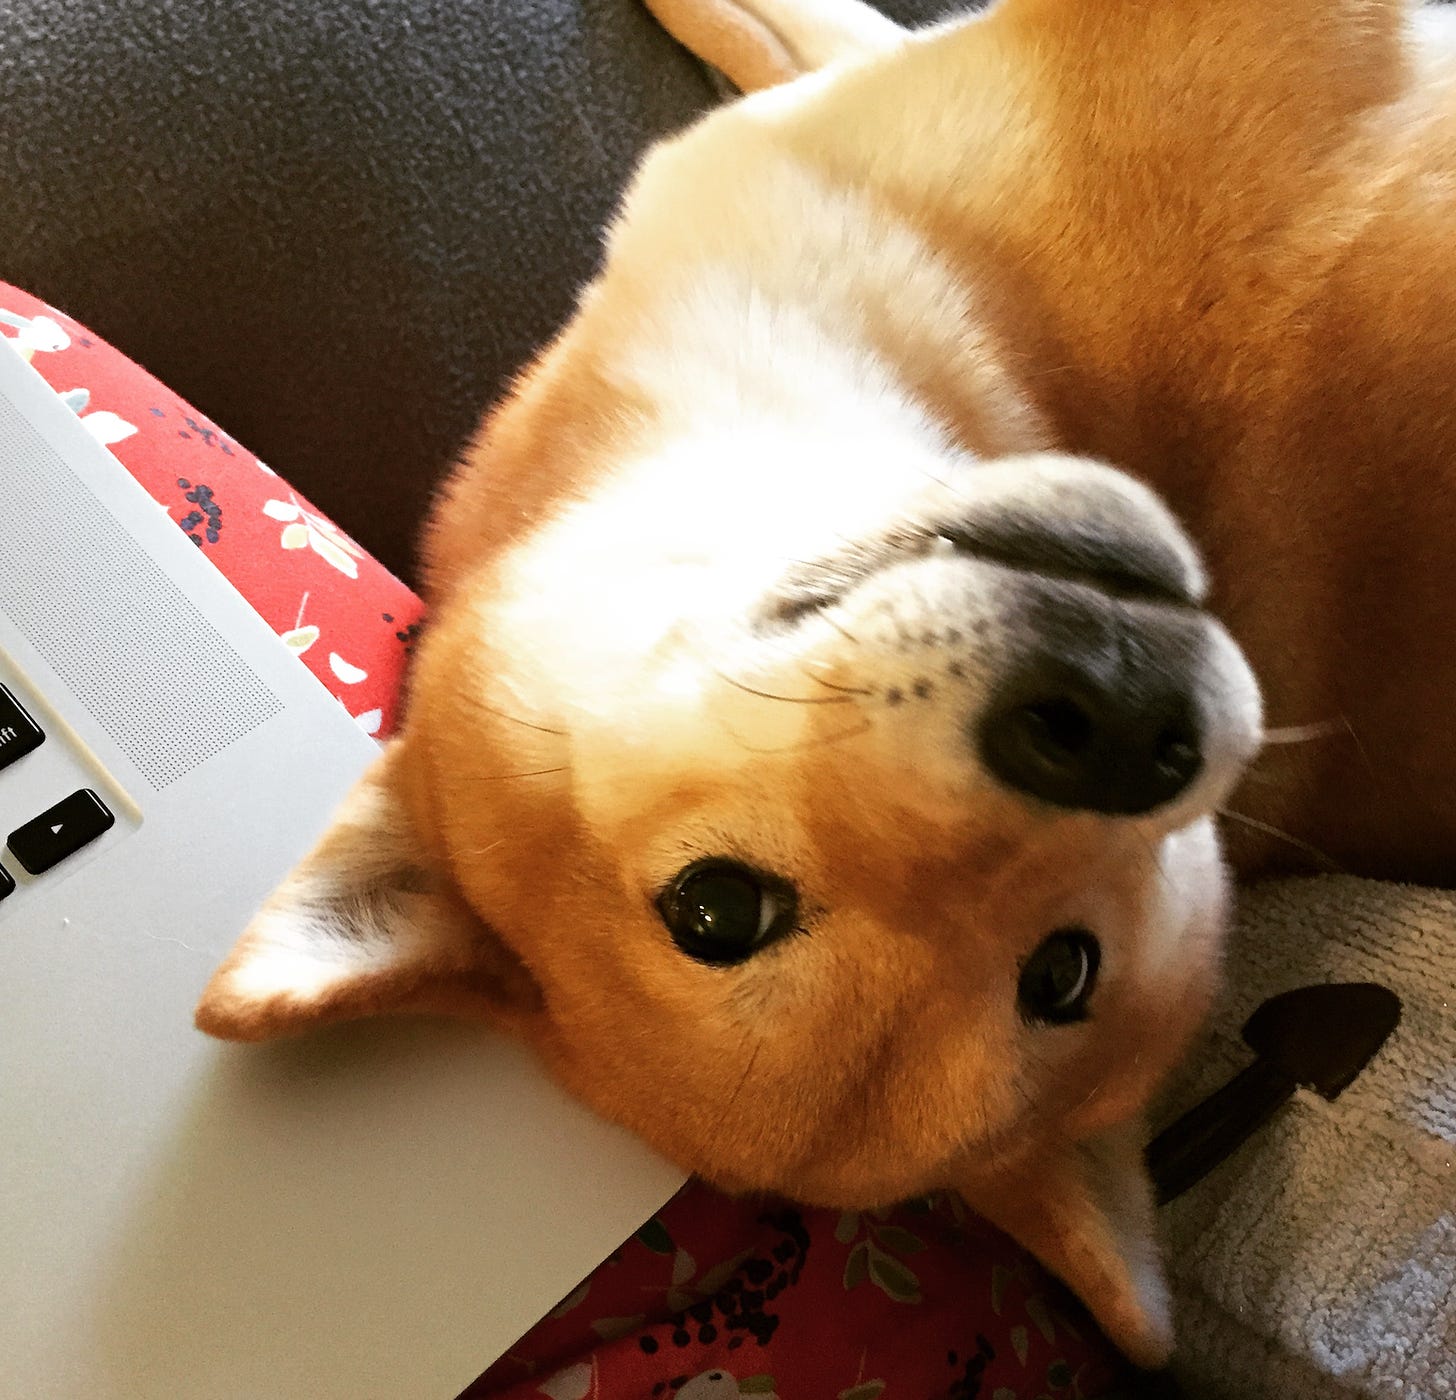 Dog looking up while trying to block laptop